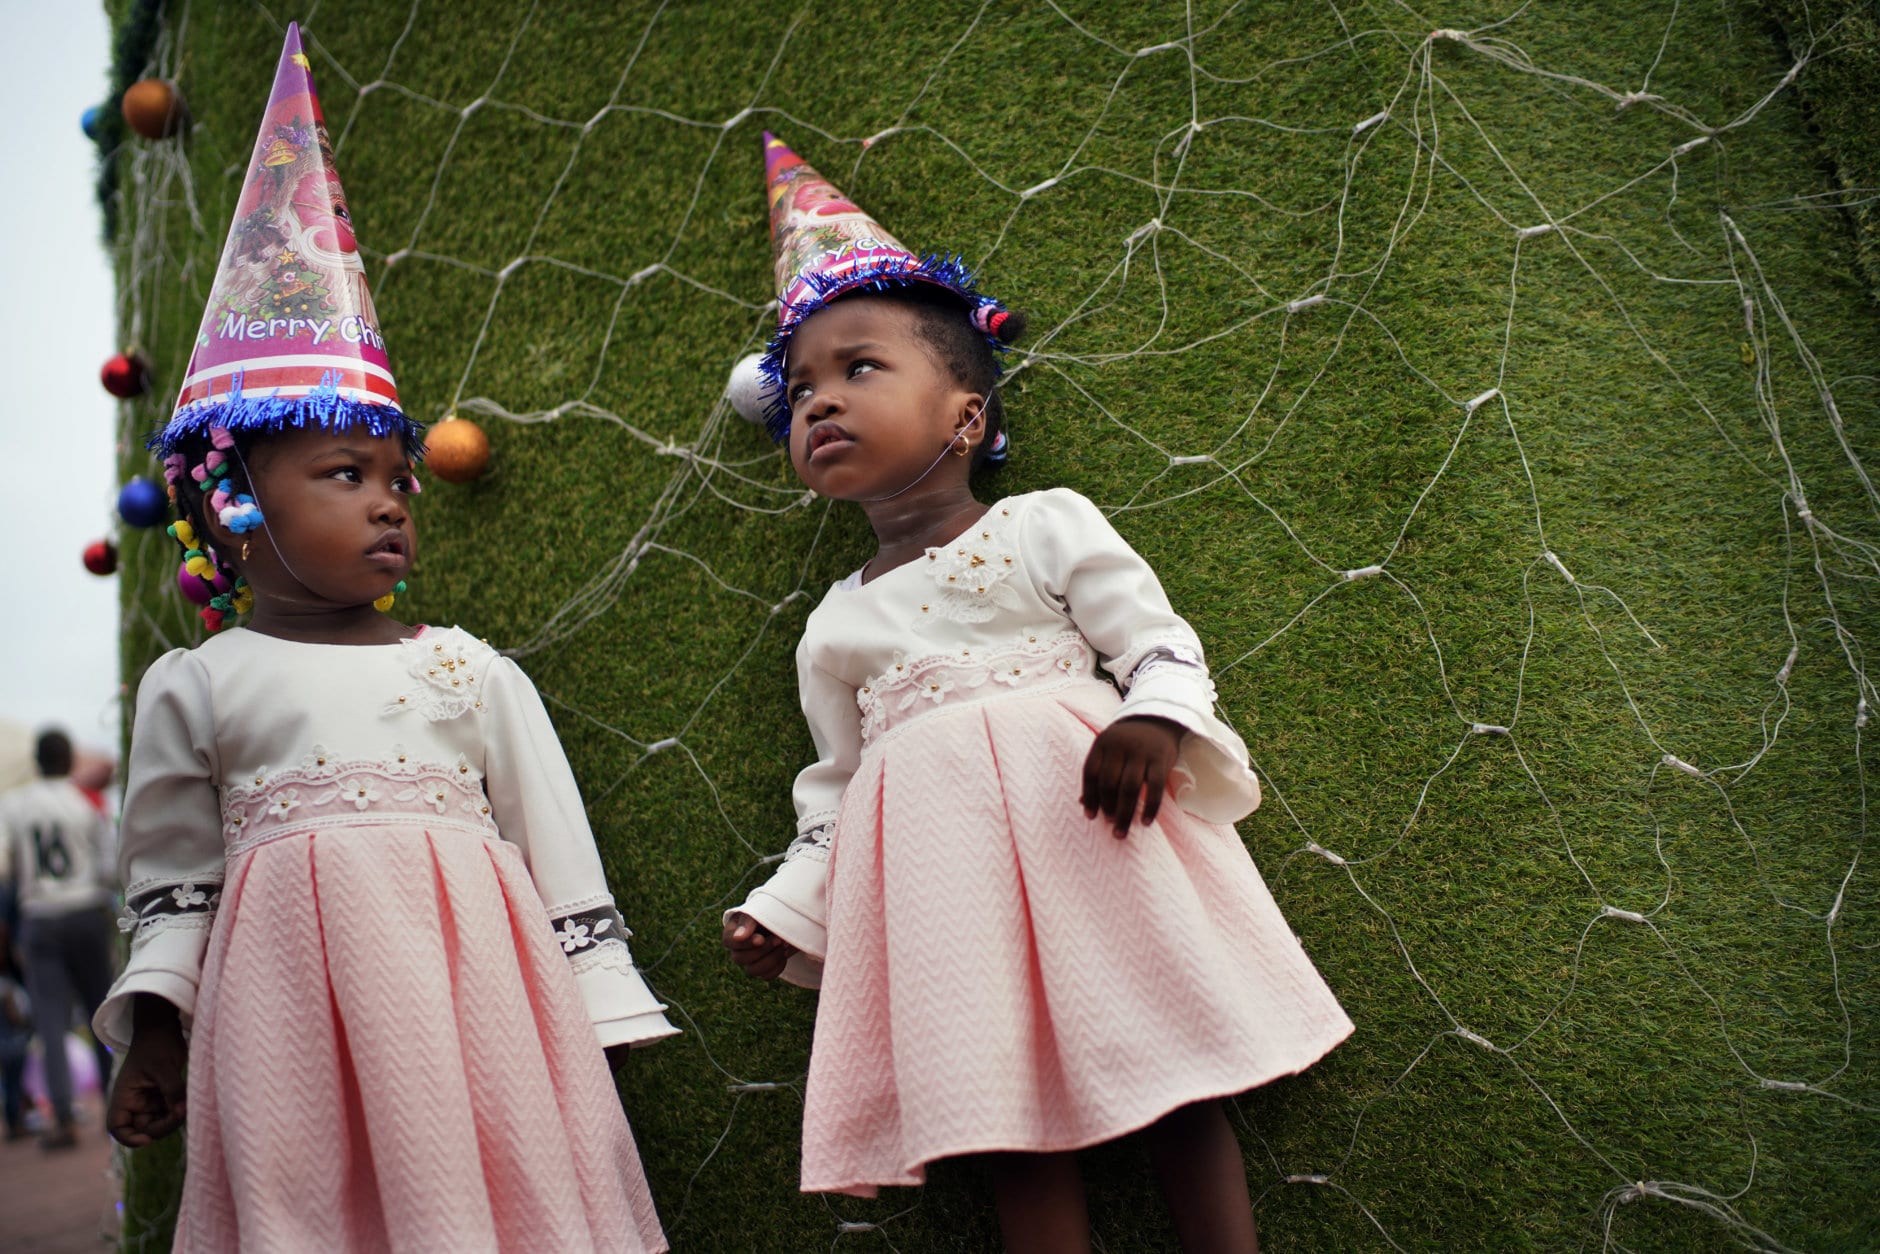 Congolese children pose in Kinshasa, Congo, Tuesday Dec. 25, 2018. Traditionally Congolese dress up and take to the parks on Christmas day, this time five days before scheduled presidential and general elections. (AP Photo/Jerome Delay)